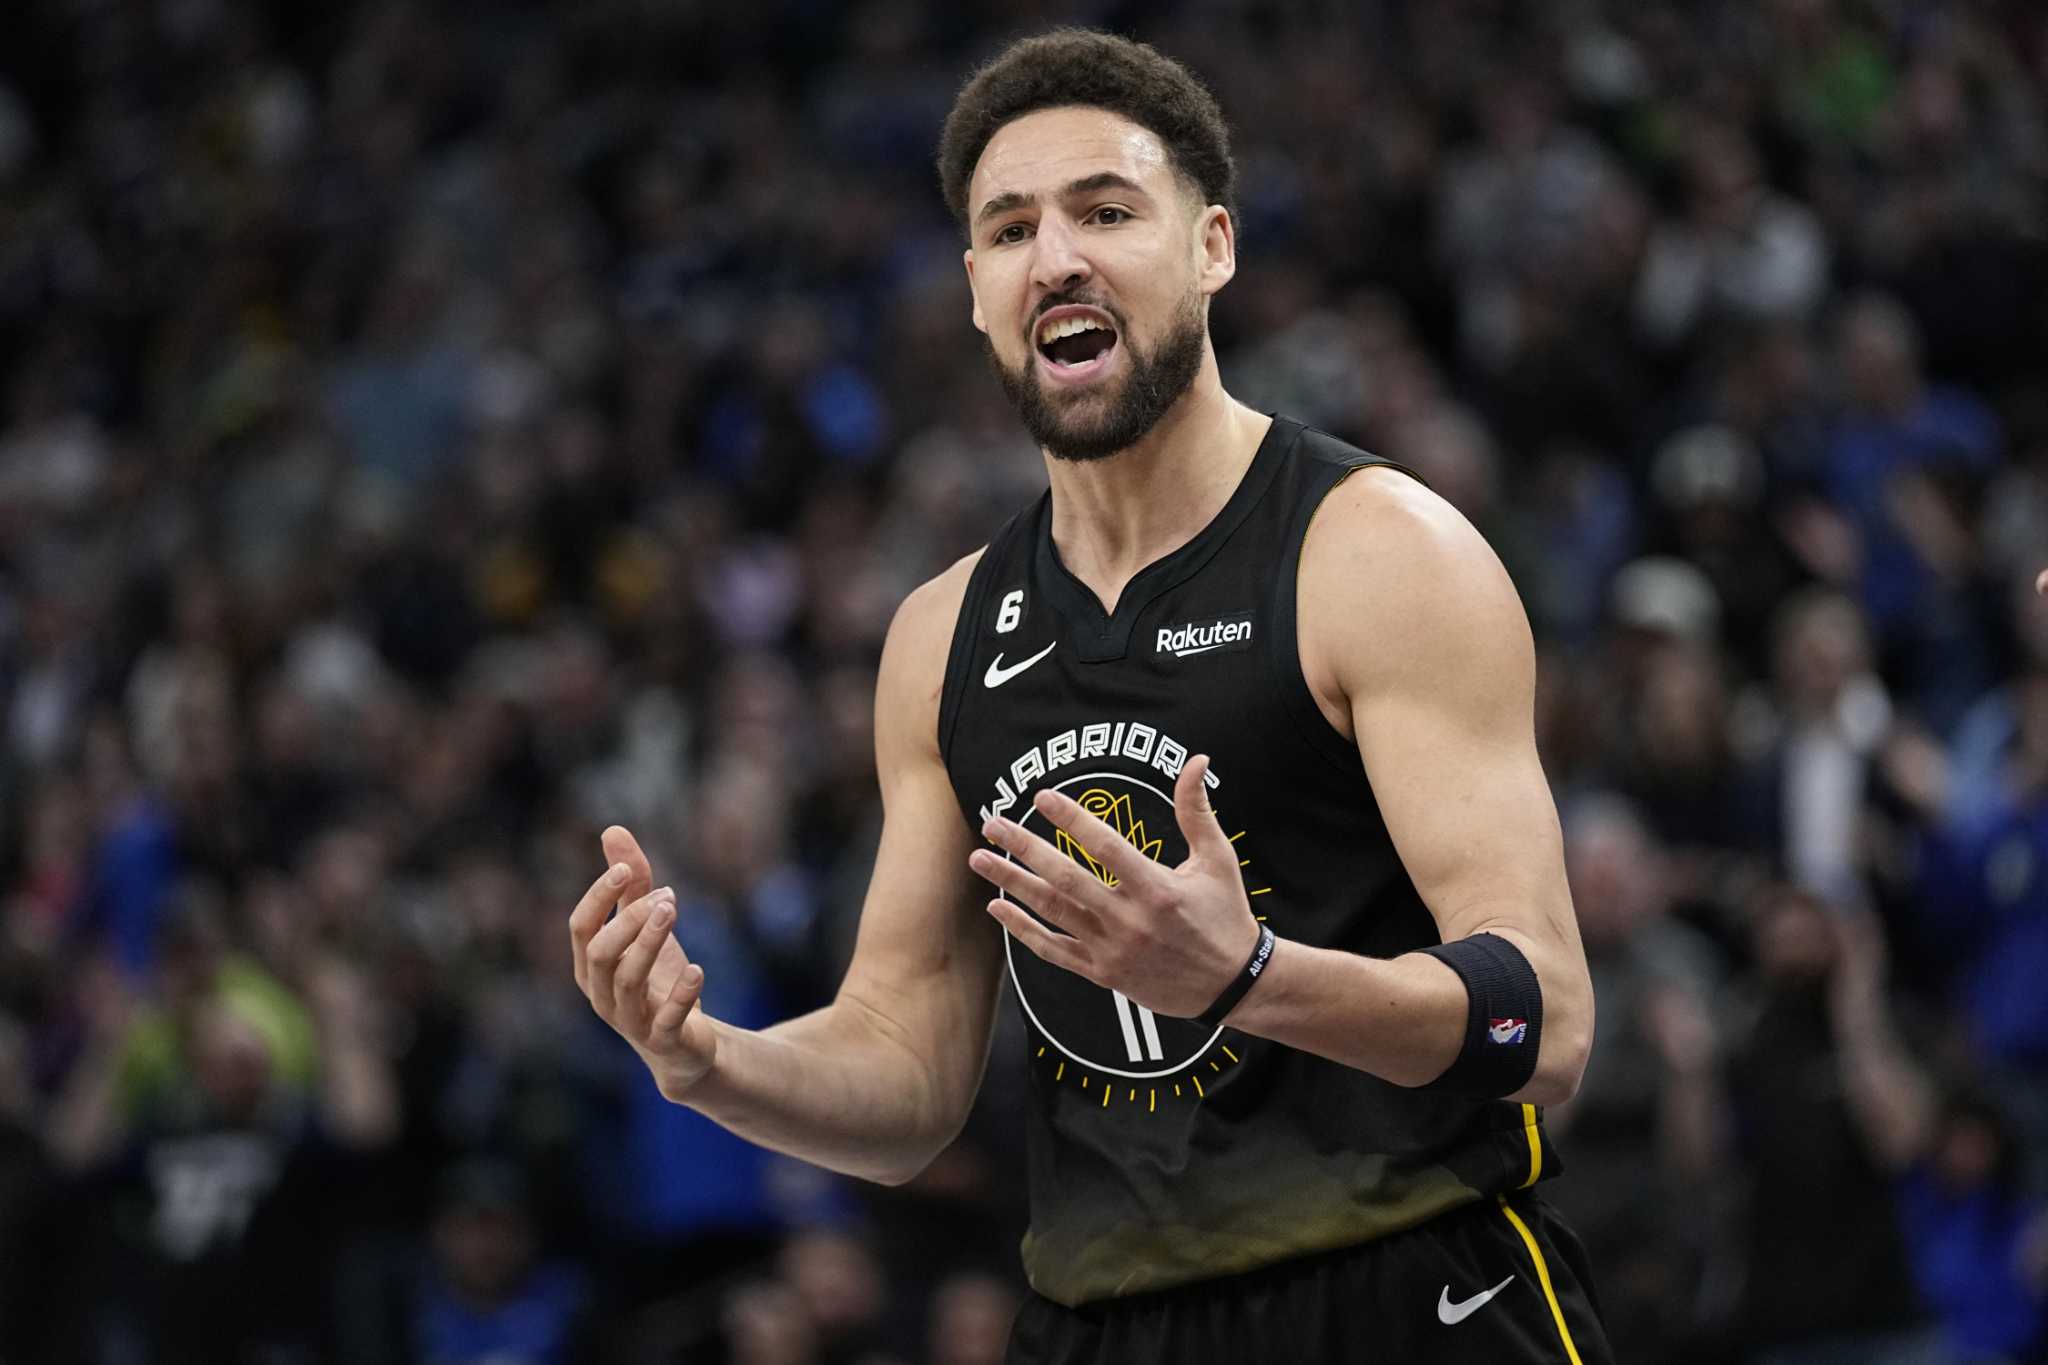 Warriors star Klay Thompson said what everyone thinks about Ja